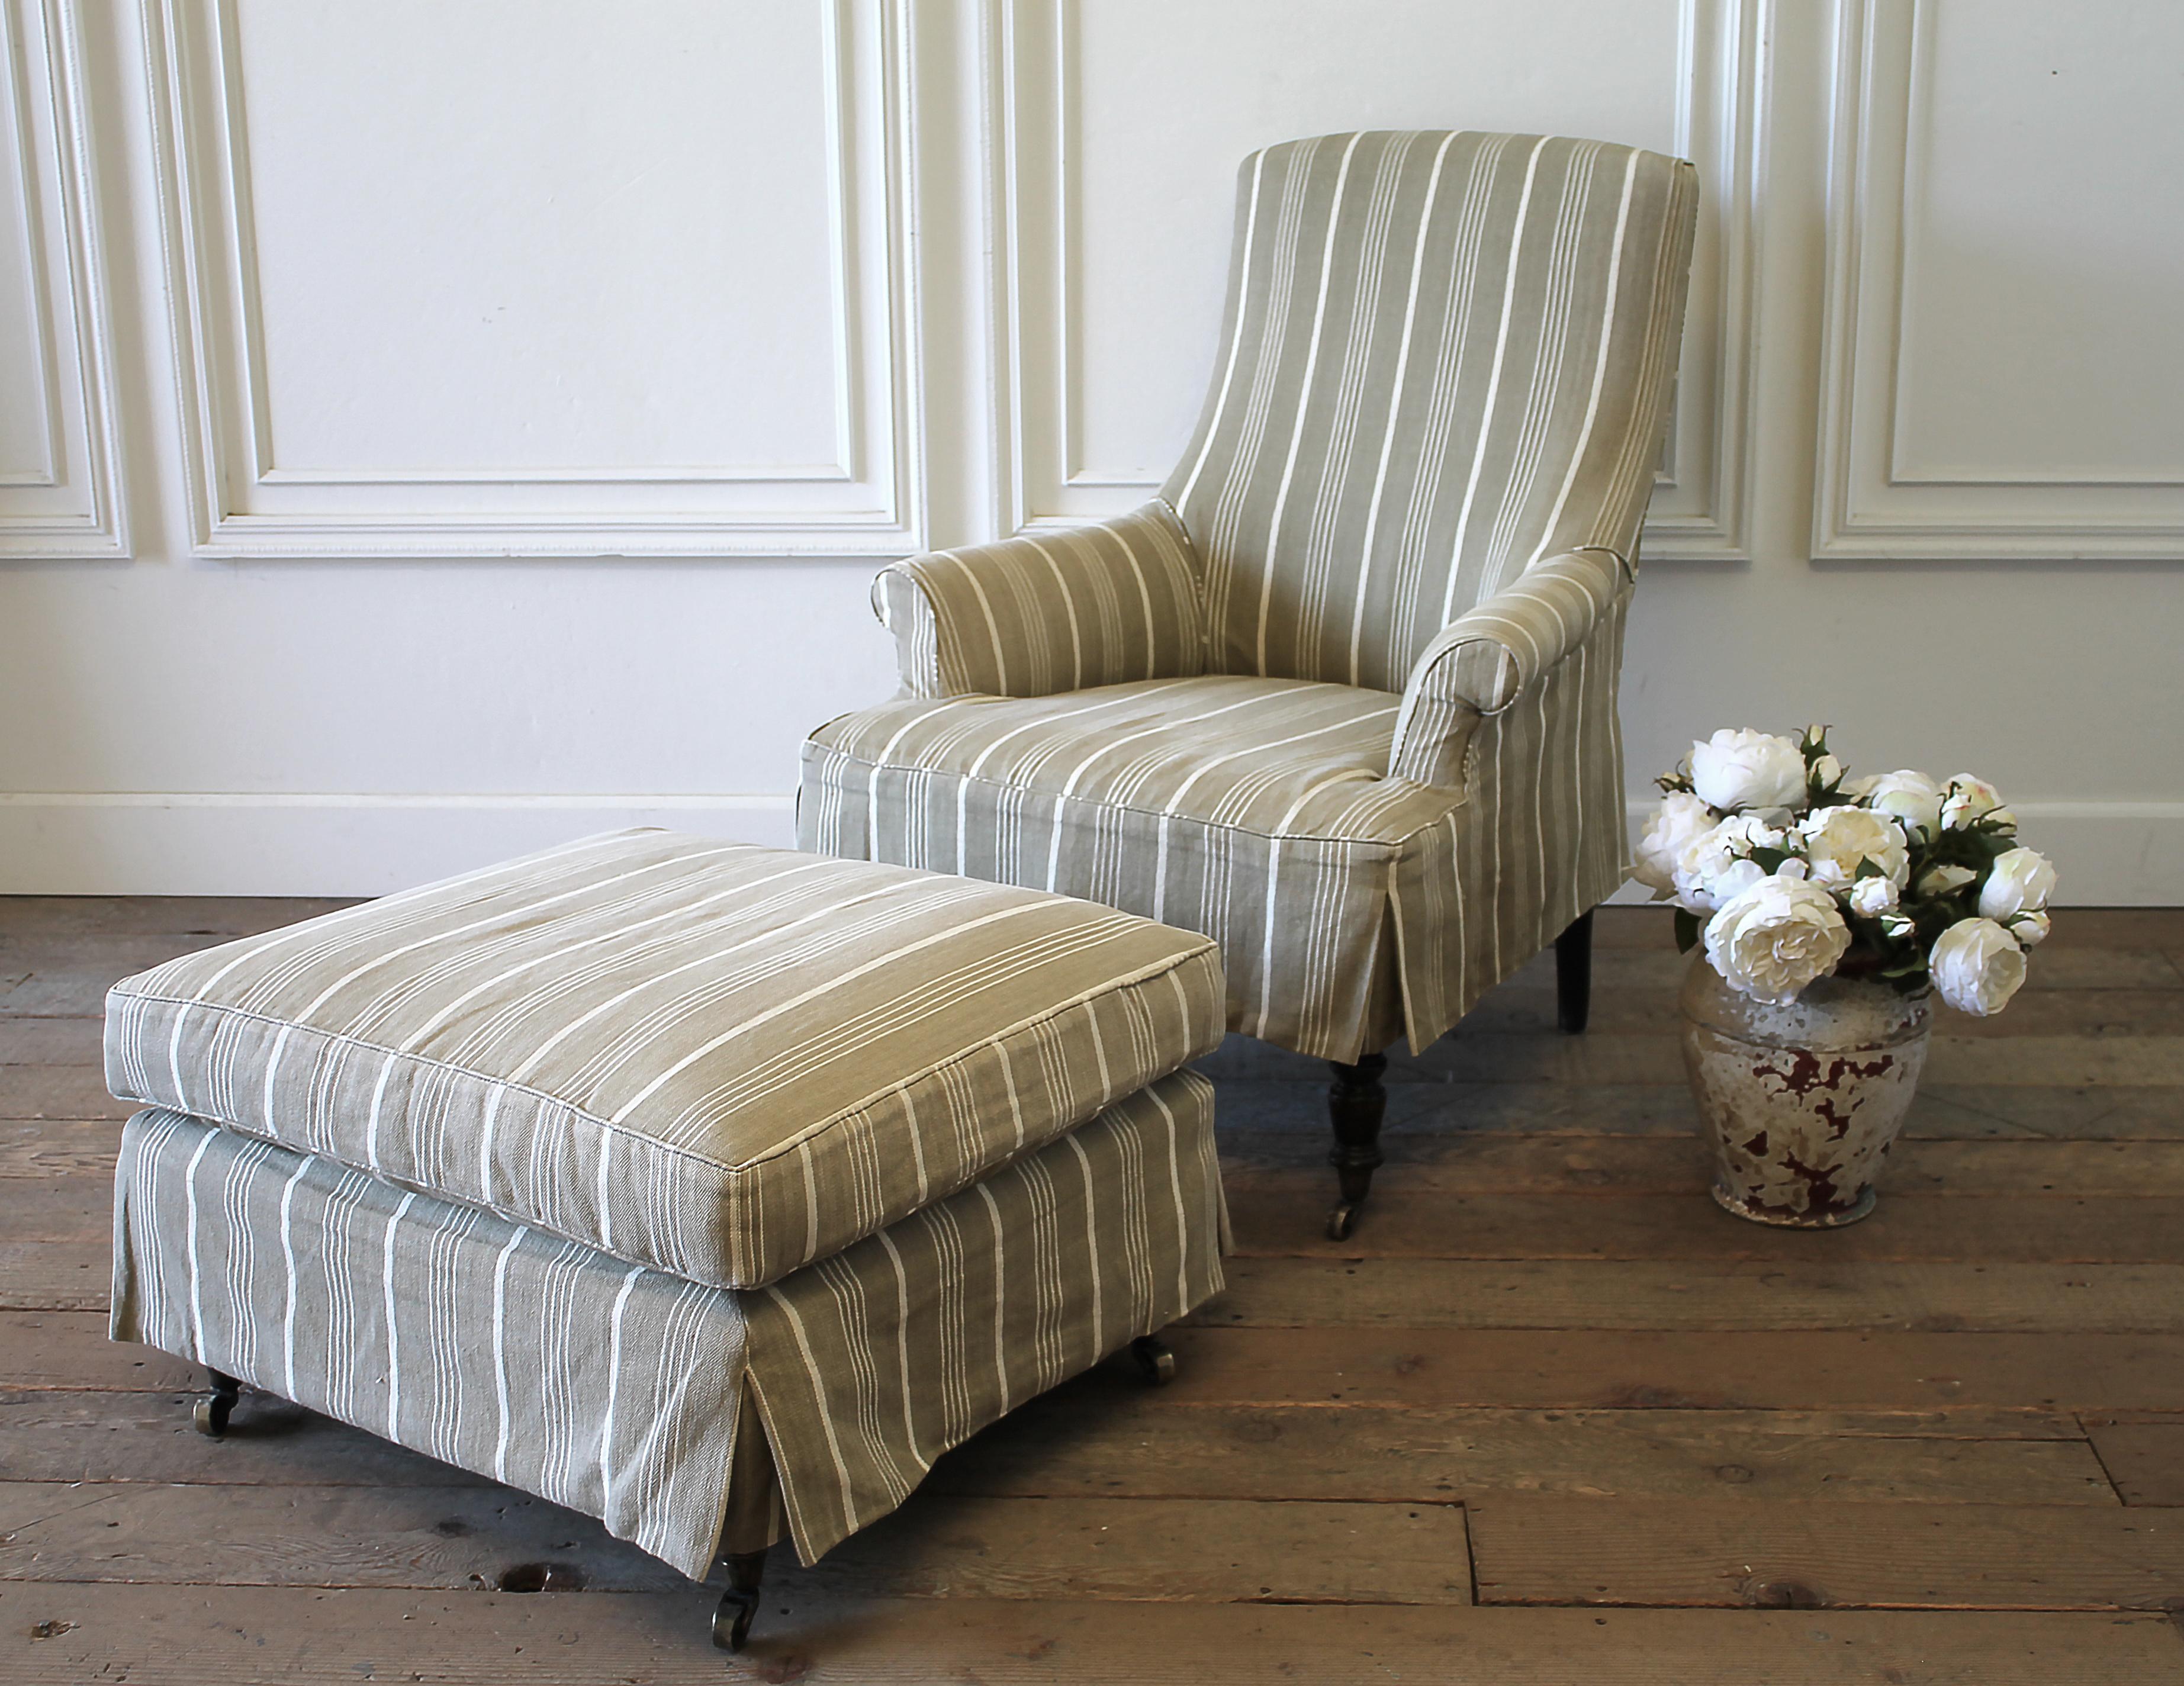 Napoleon style chair and ottoman with linen stripe slip cover
Custom-made chair with muslin upholstery, and French ticking linen stripe slip cover. The chair and ottoman have a dark espresso carved legs with brass caster wheels.
The ottoman has a